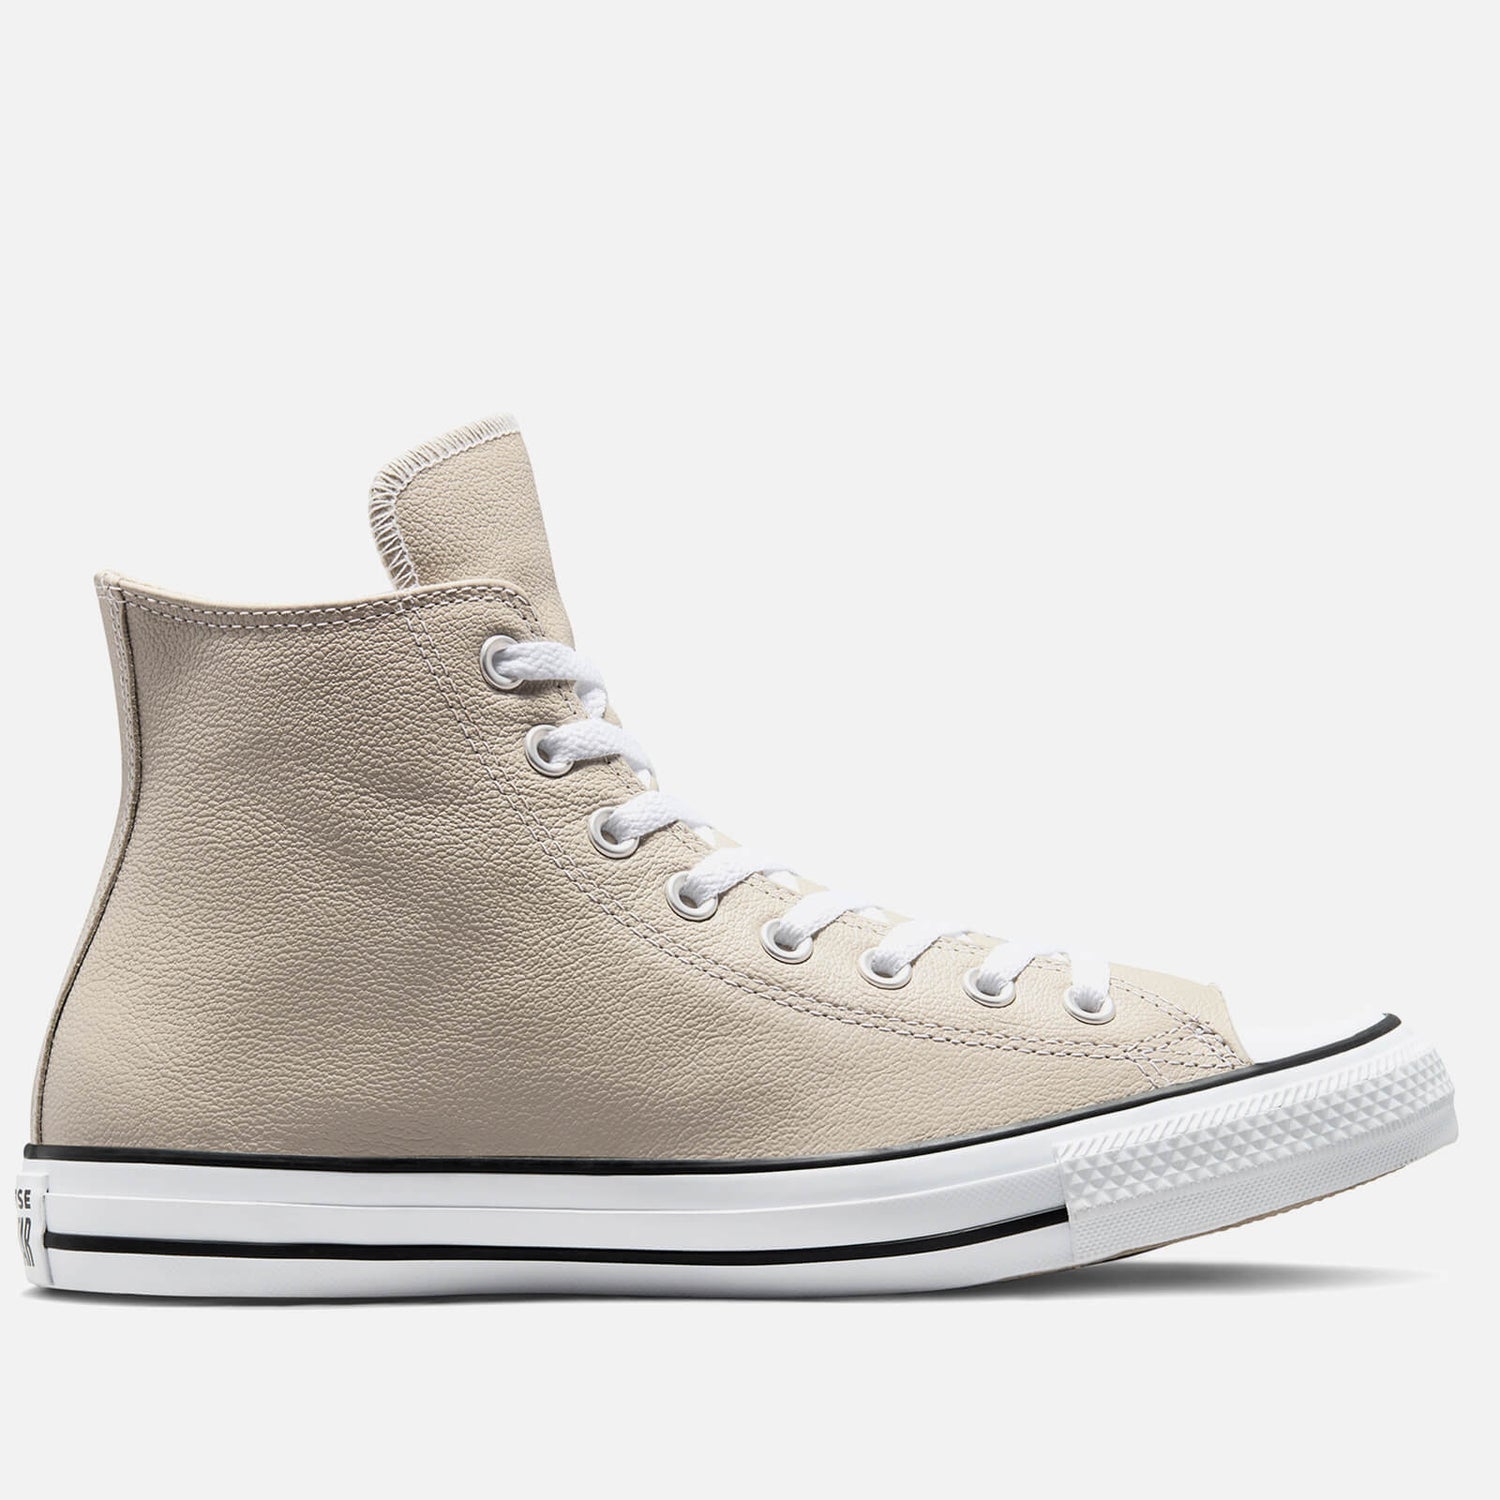 Converse Men's Chuck Taylor All Star Seasonal Leather Hi-Top Trainers - String